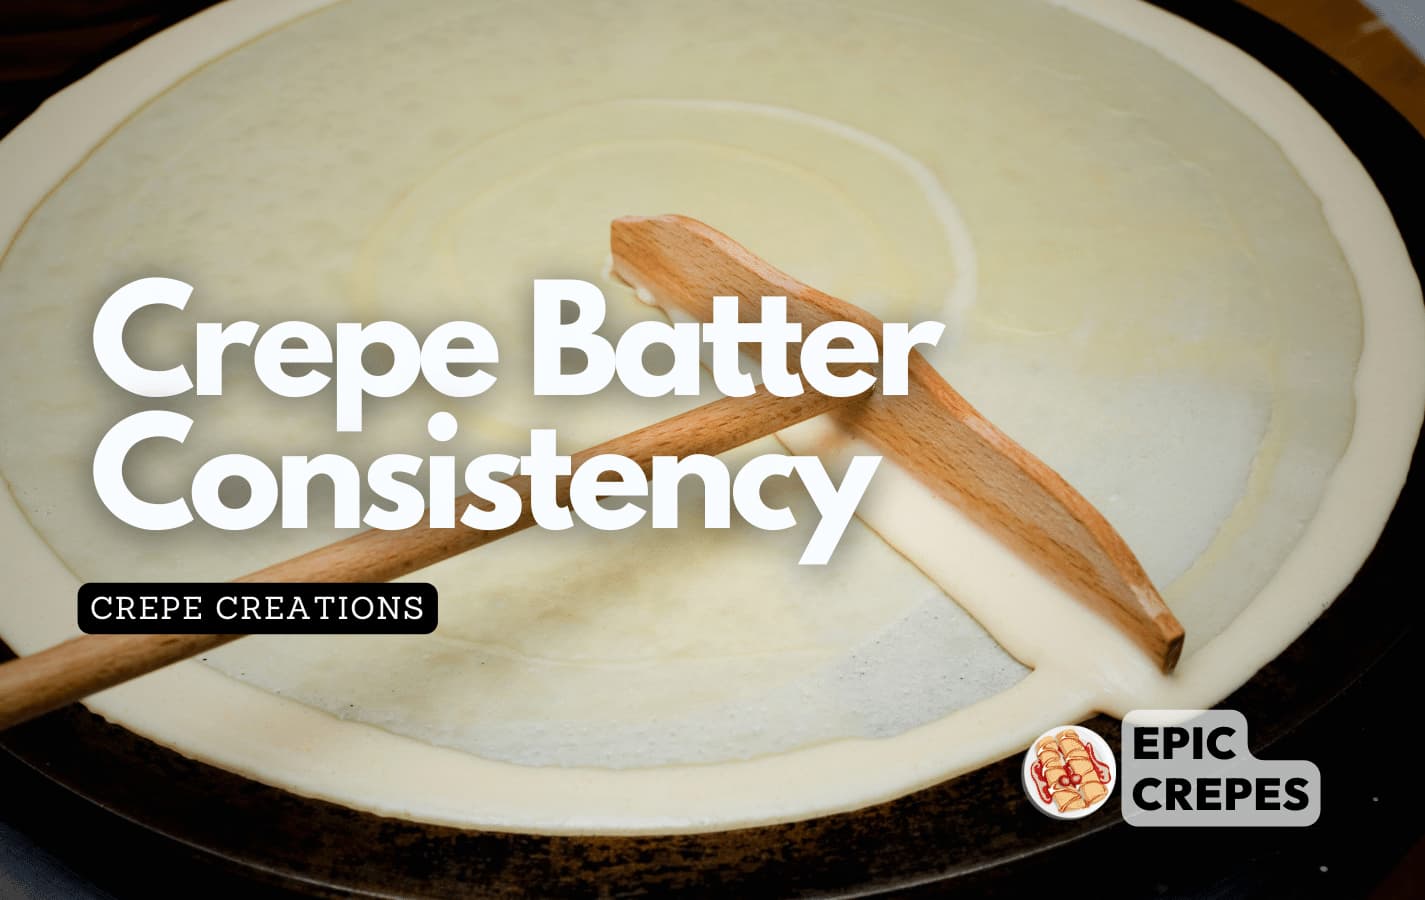 Spreading out crepe batter on a pan to cook a perfect crepe